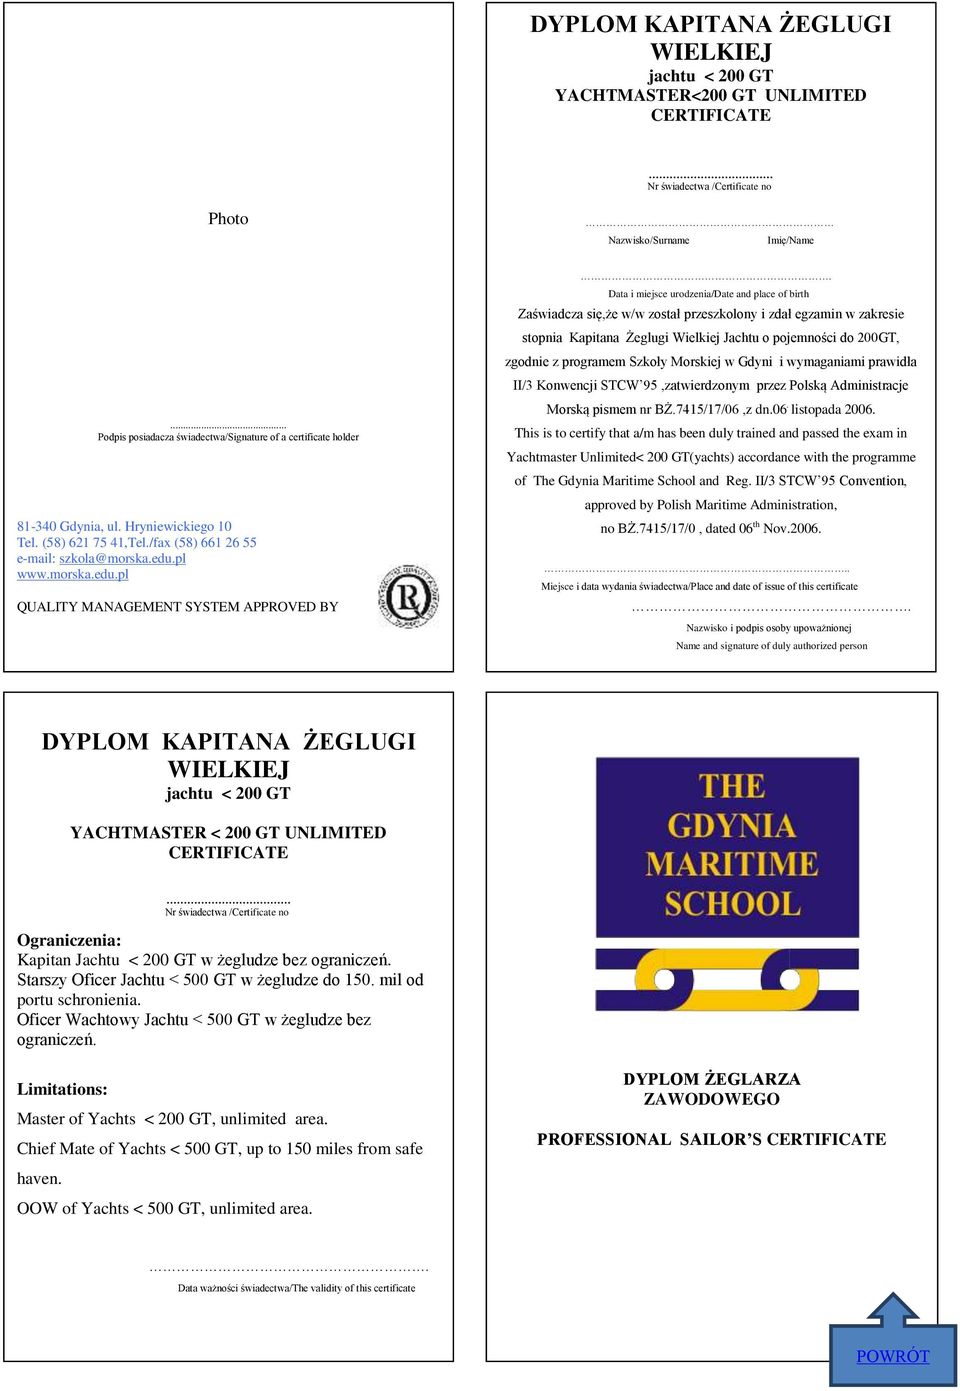 Yachtmaster Unlimited< 200 GT(yachts) accordance with the programme of The Gdynia Maritime School and Reg. II/3 STCW 95 Convention, approved by Polish Maritime Administration, no BŻ.